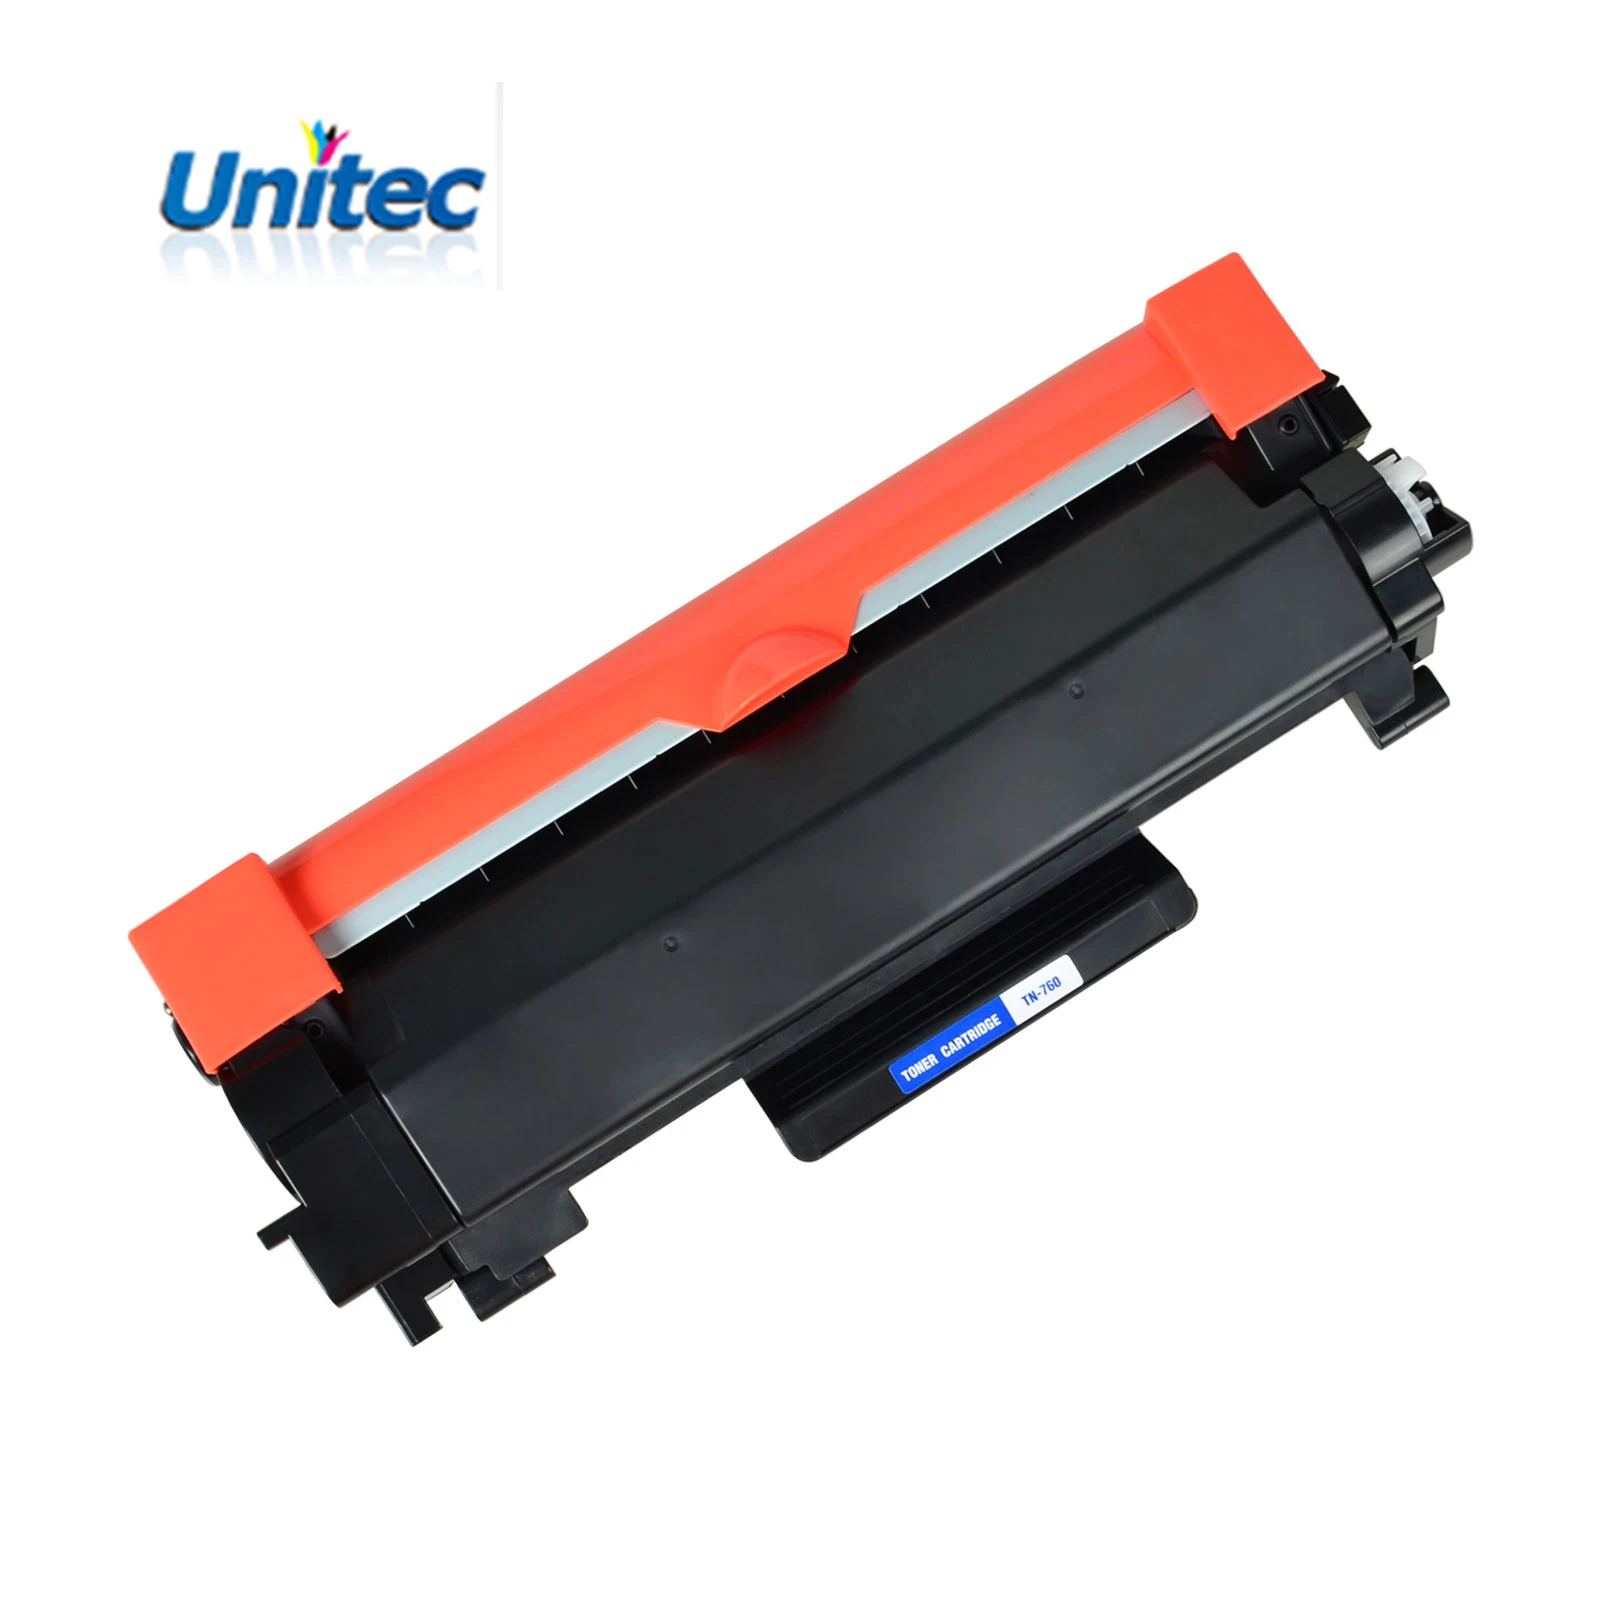 Replacement for Brother TN760 TN-760 TN730 Compatible Toner Cartridge use with Brother l2390dw DCP-l2550dw MFC-l2710dw